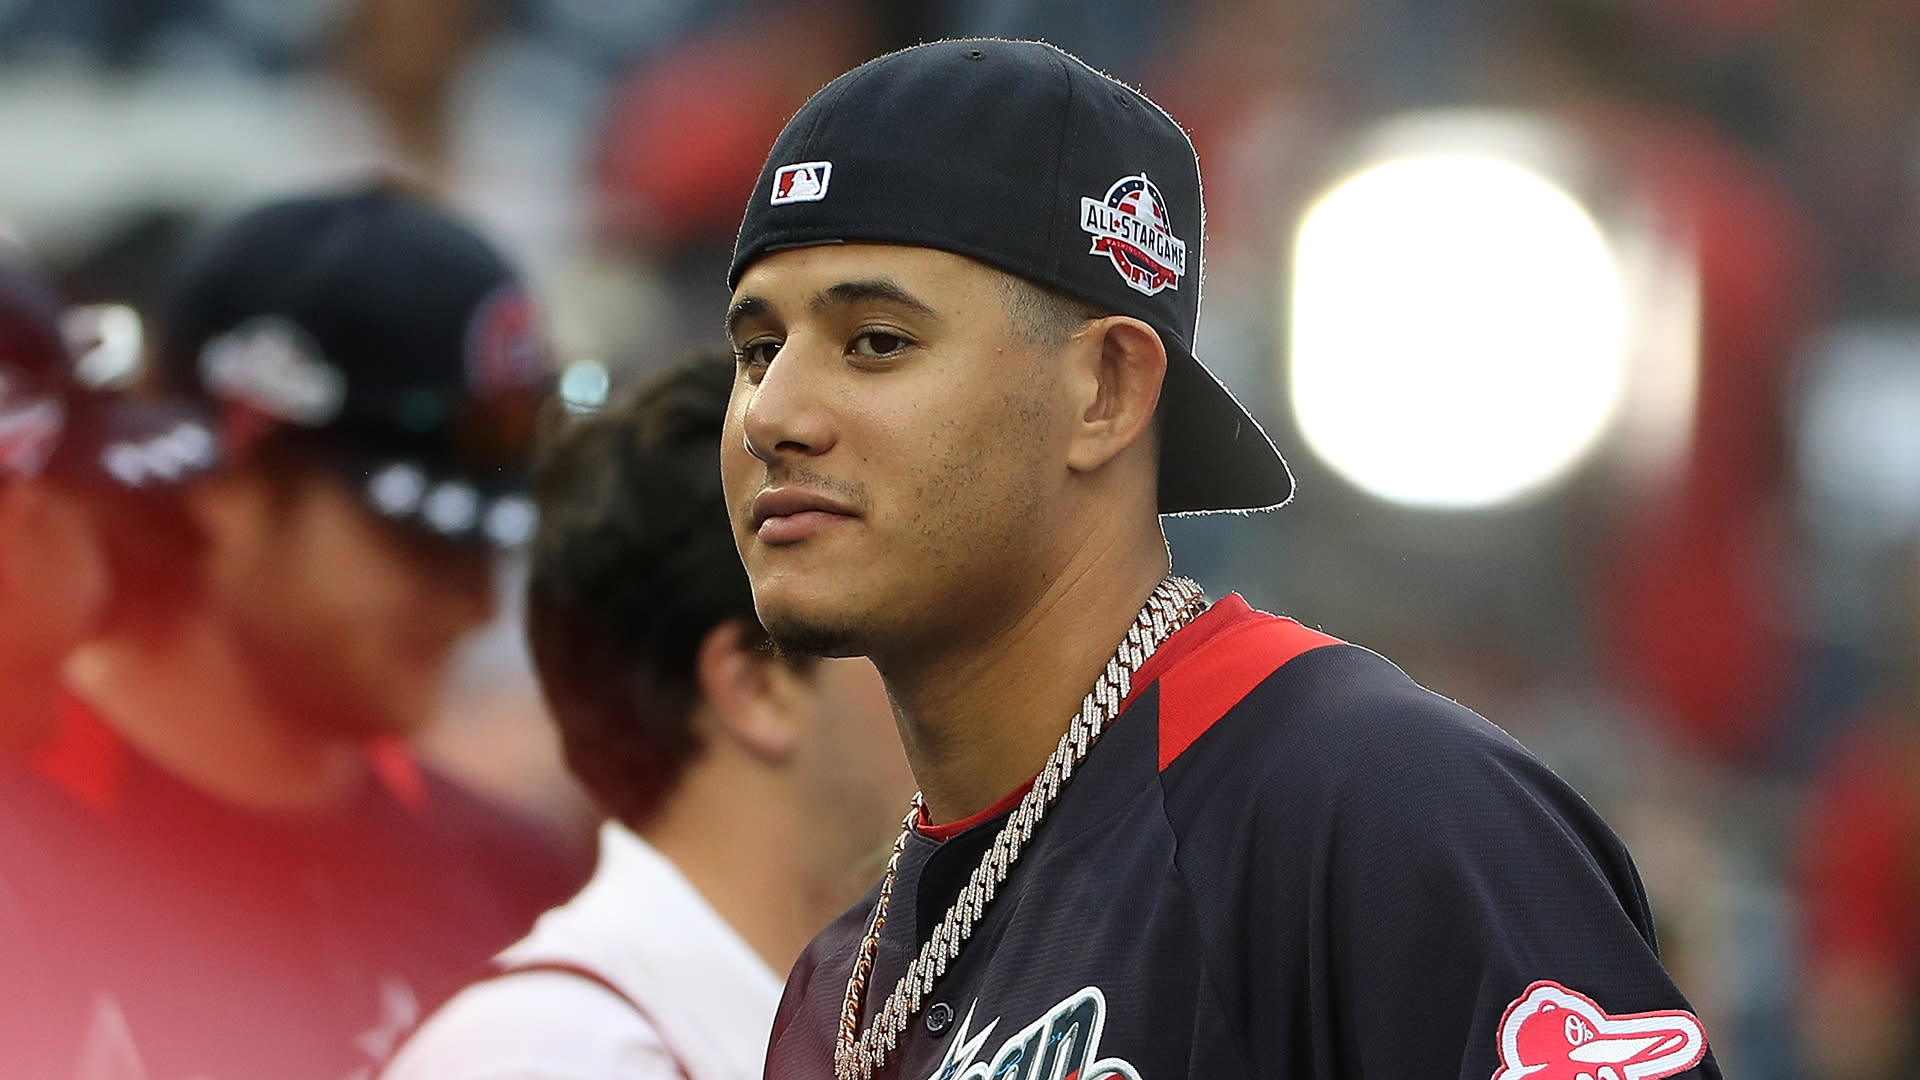 Orioles trade All-Star shortstop Manny Machado to Dodgers for five